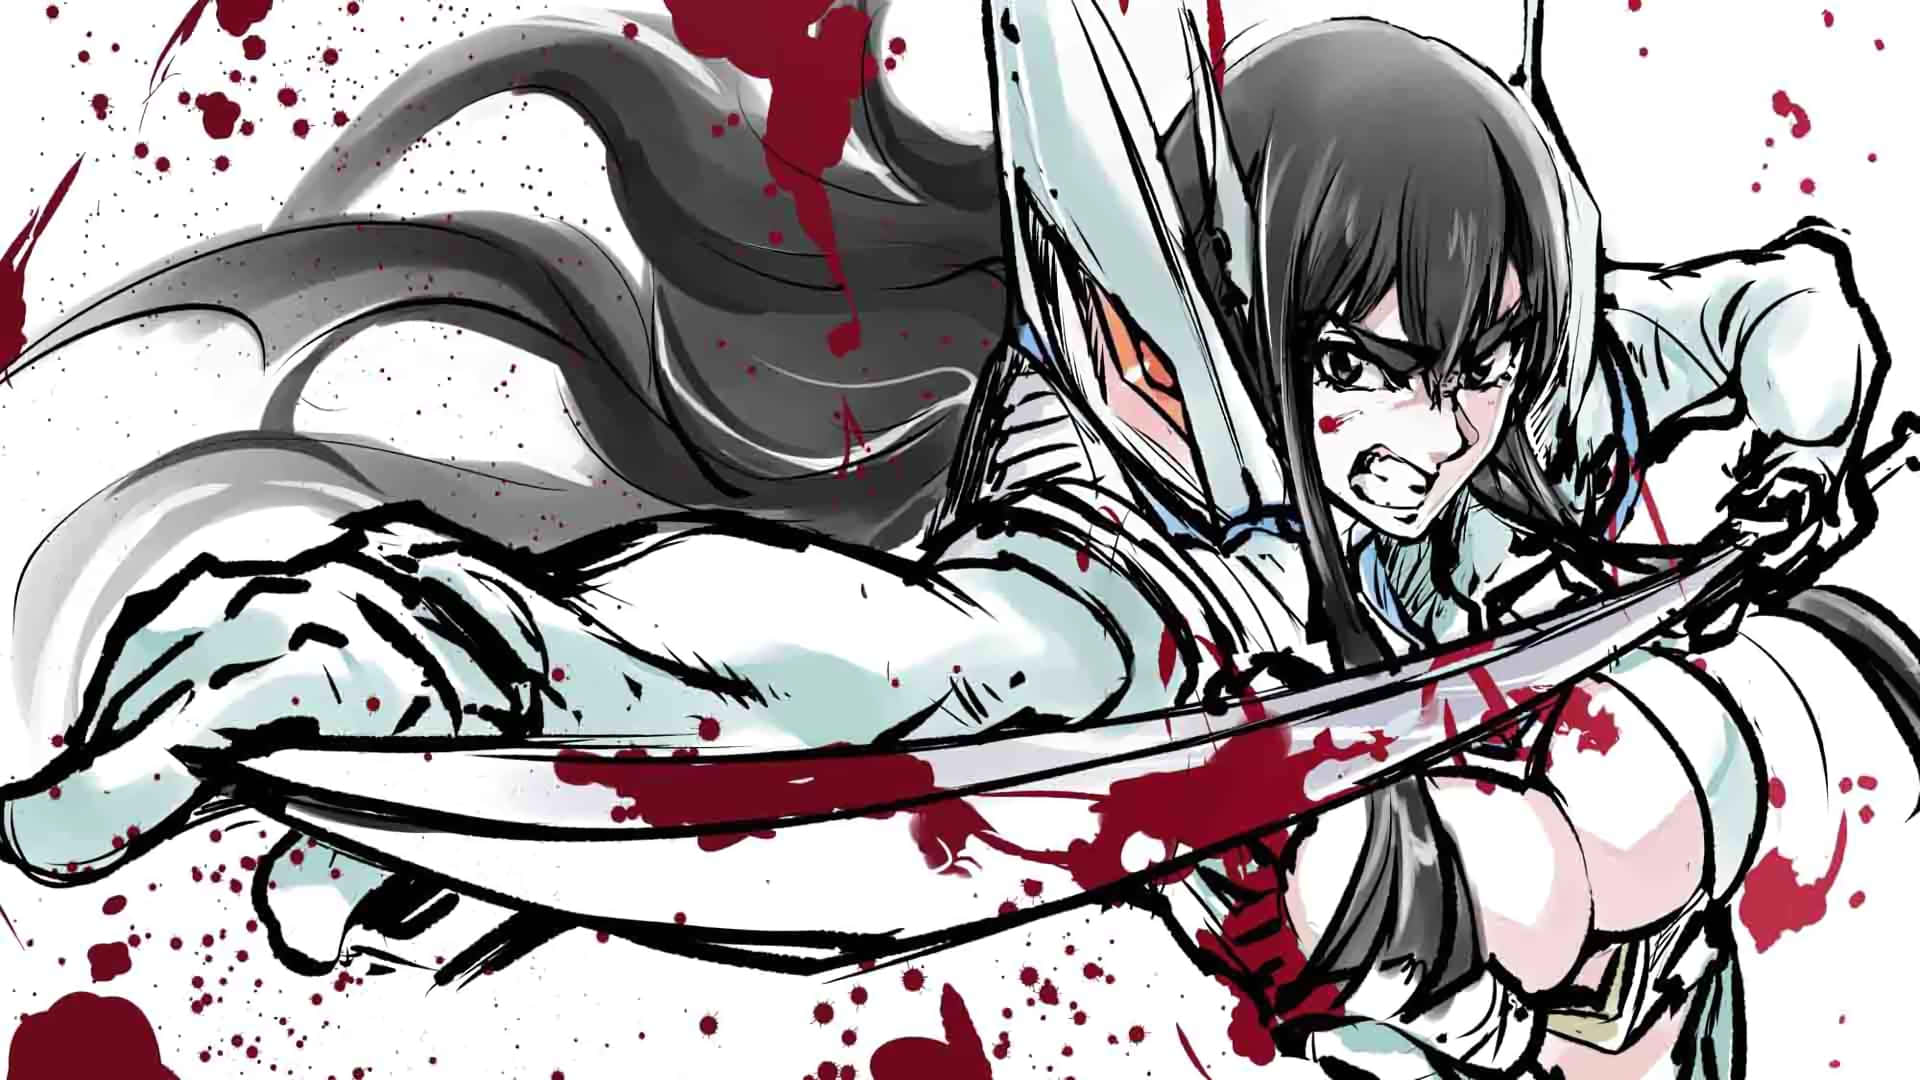 Satsuki Kiryuin stands in defiance of all those who have done her wrong Wallpaper